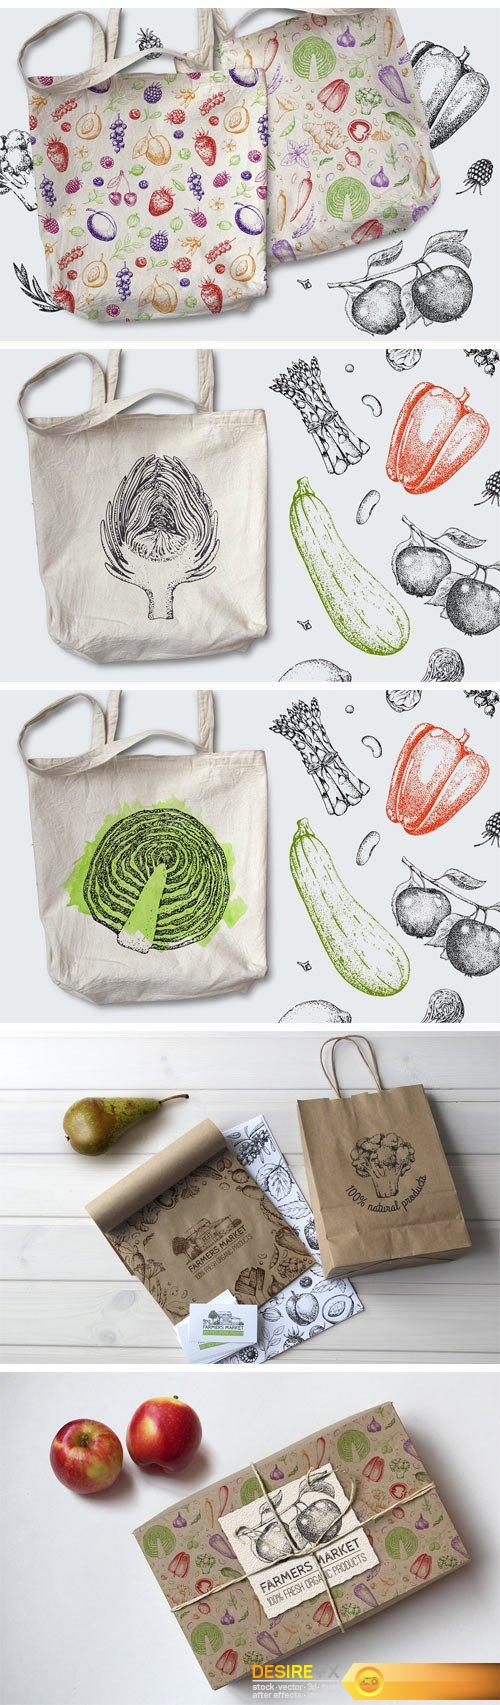 1509282119_hand-drawn-vegetables-and-fruit4